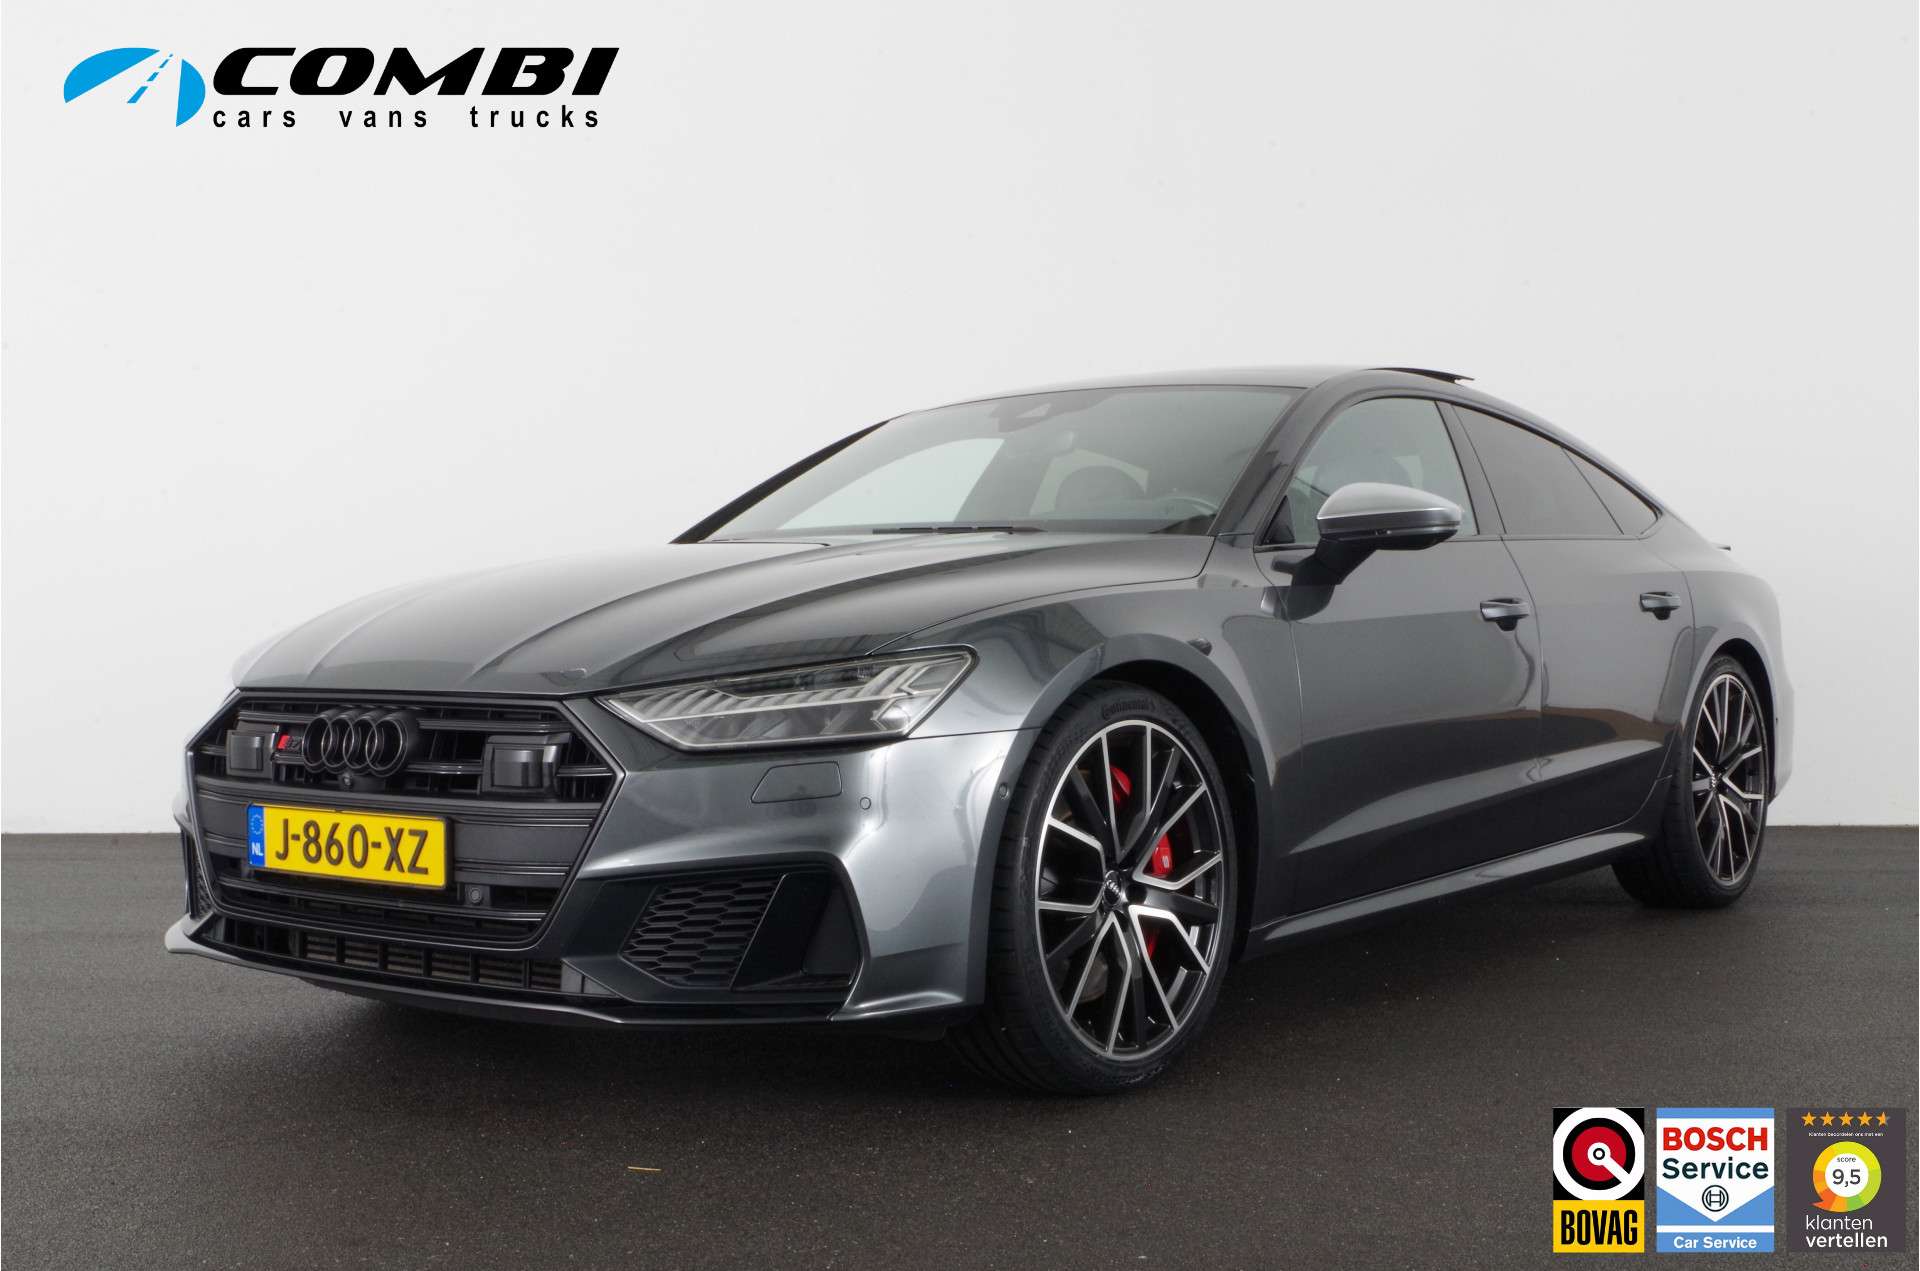 Audi A7 Compact in Grey used in HARDENBERG for € 66,850.-